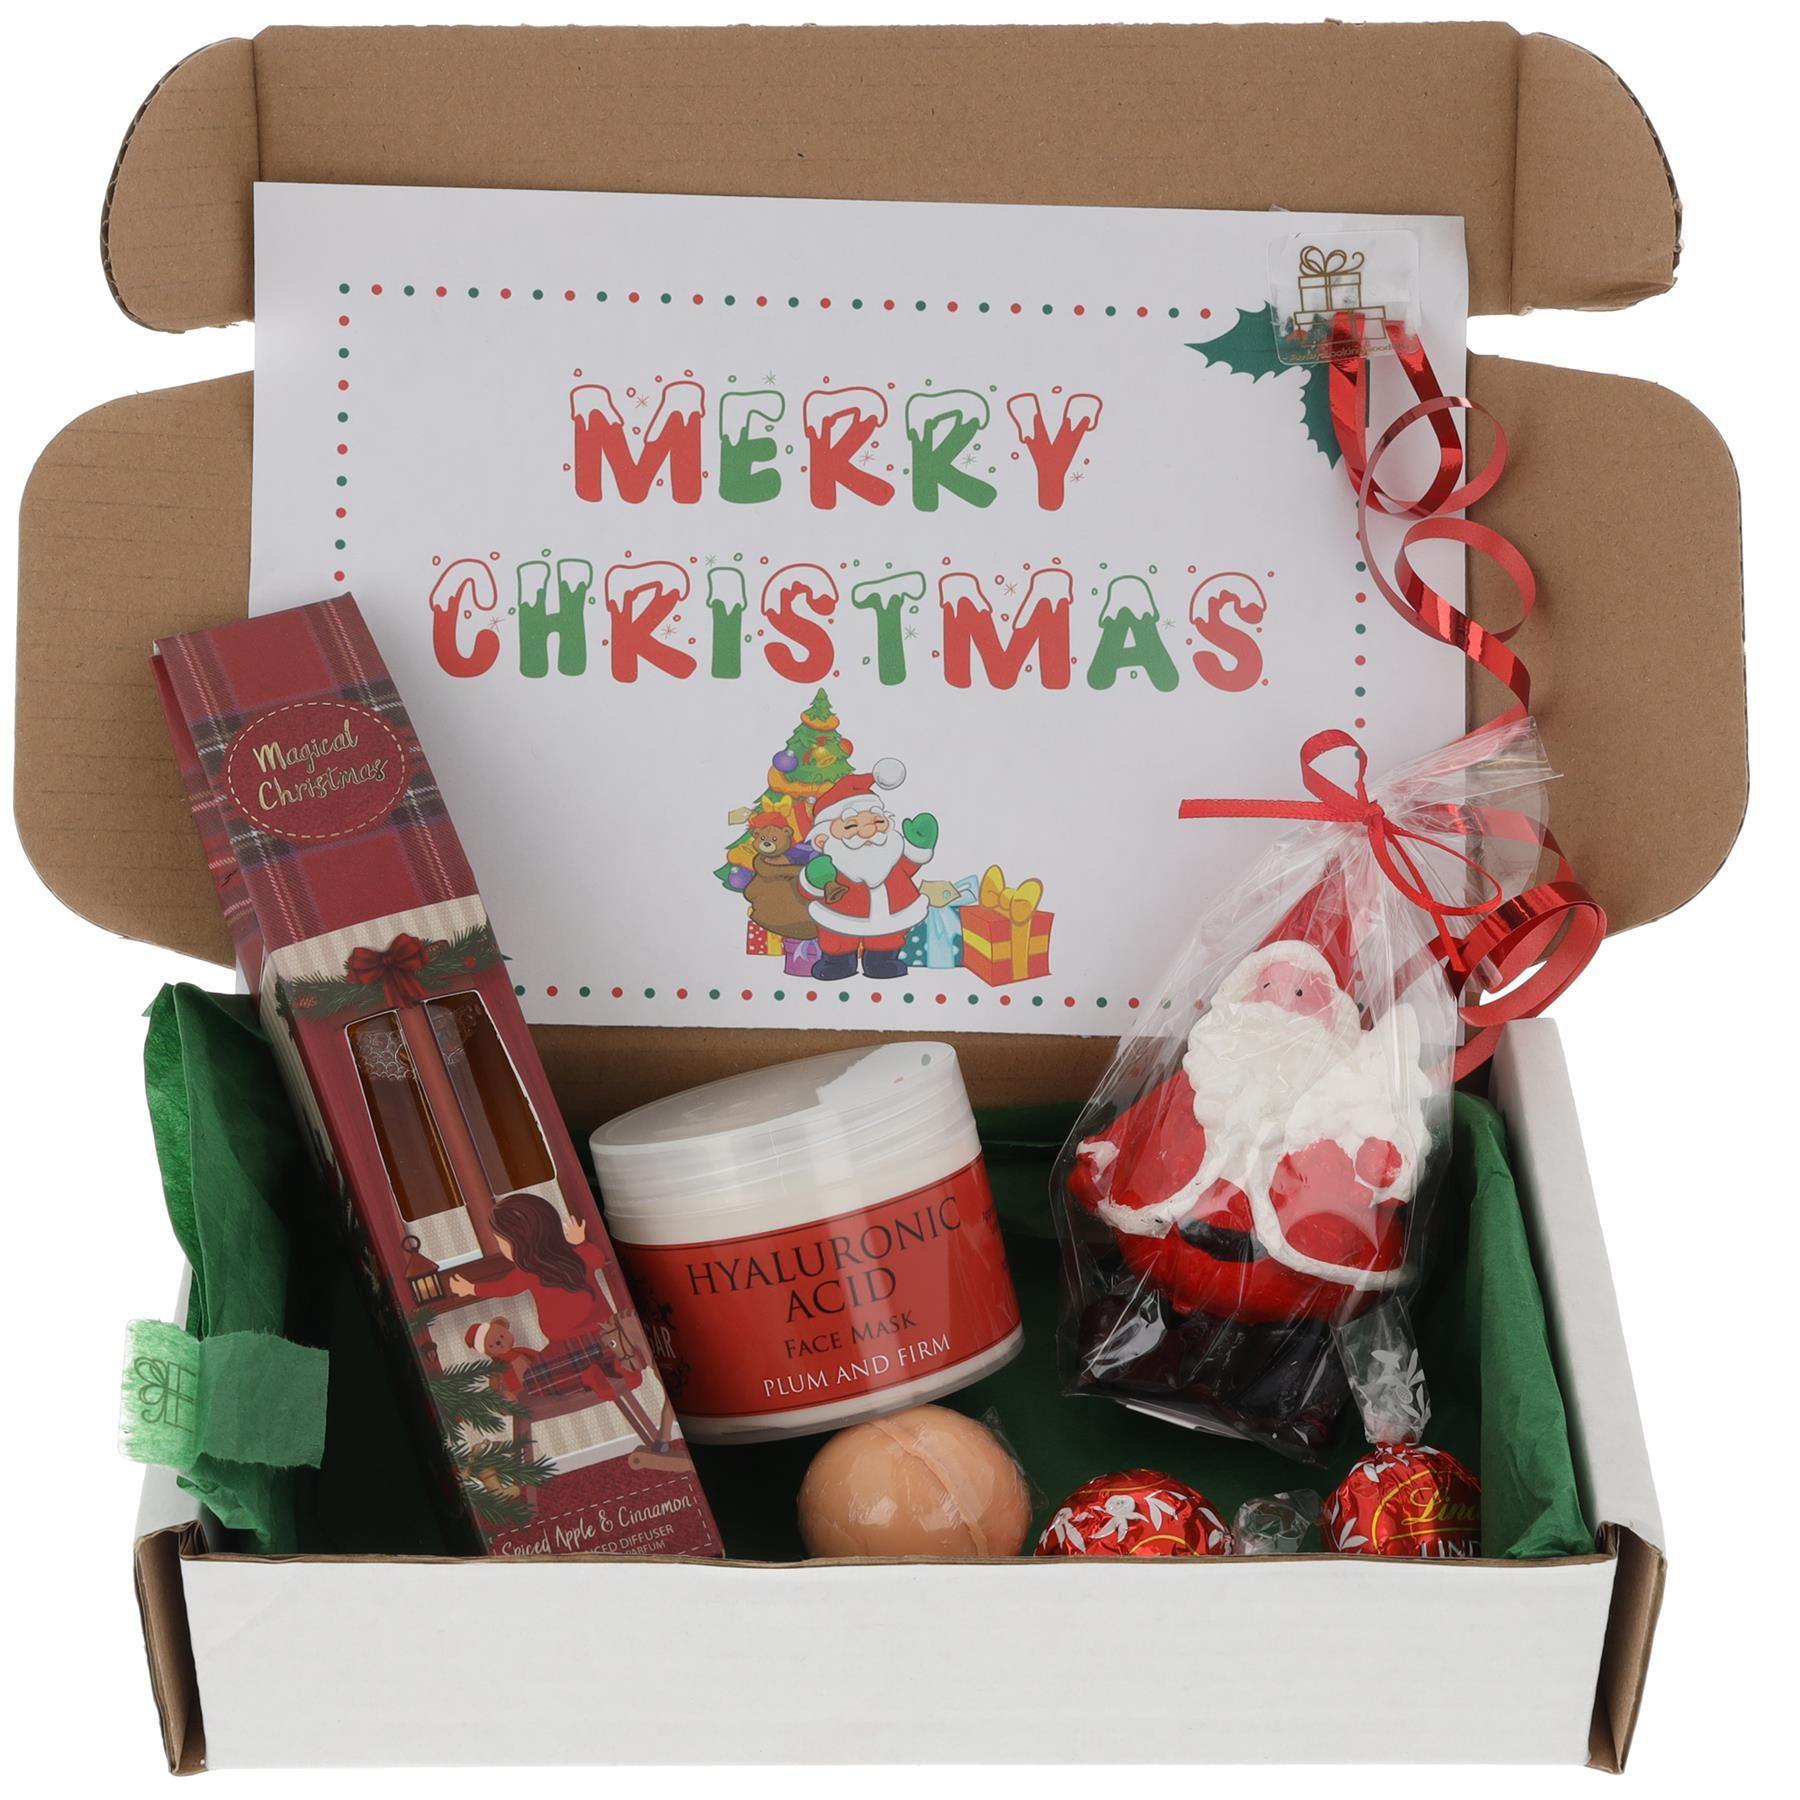 Christmas Diffuser and Candle Pamper & Chocolate Gift Box  - Always Looking Good -   